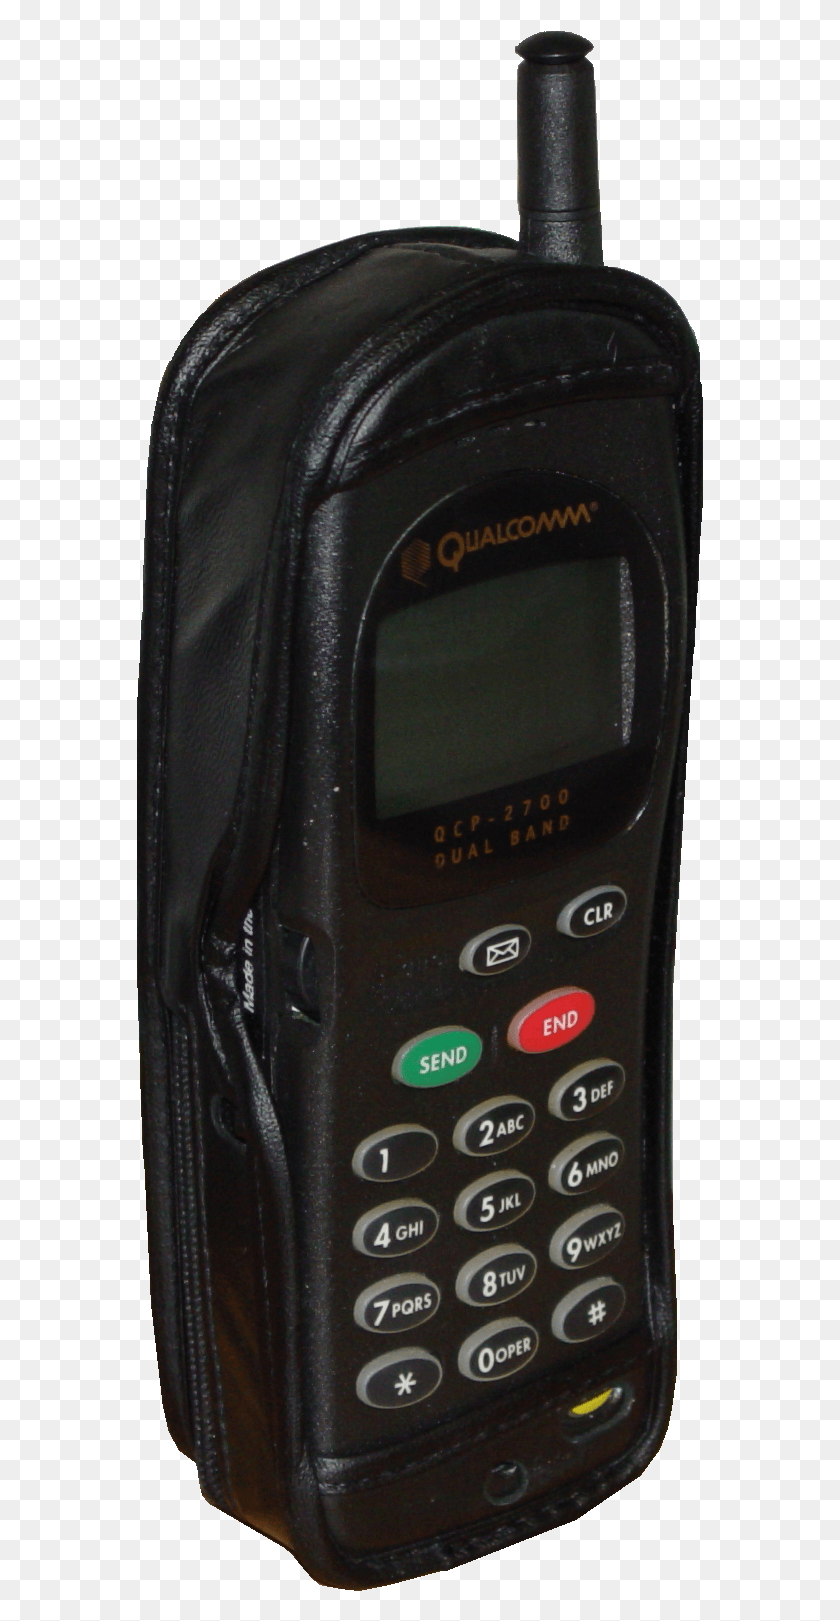 567x1561 Qualcomm Qcp 2700 Phone Phone Now And Then, Electronics, Mobile Phone, Cell Phone Descargar Hd Png